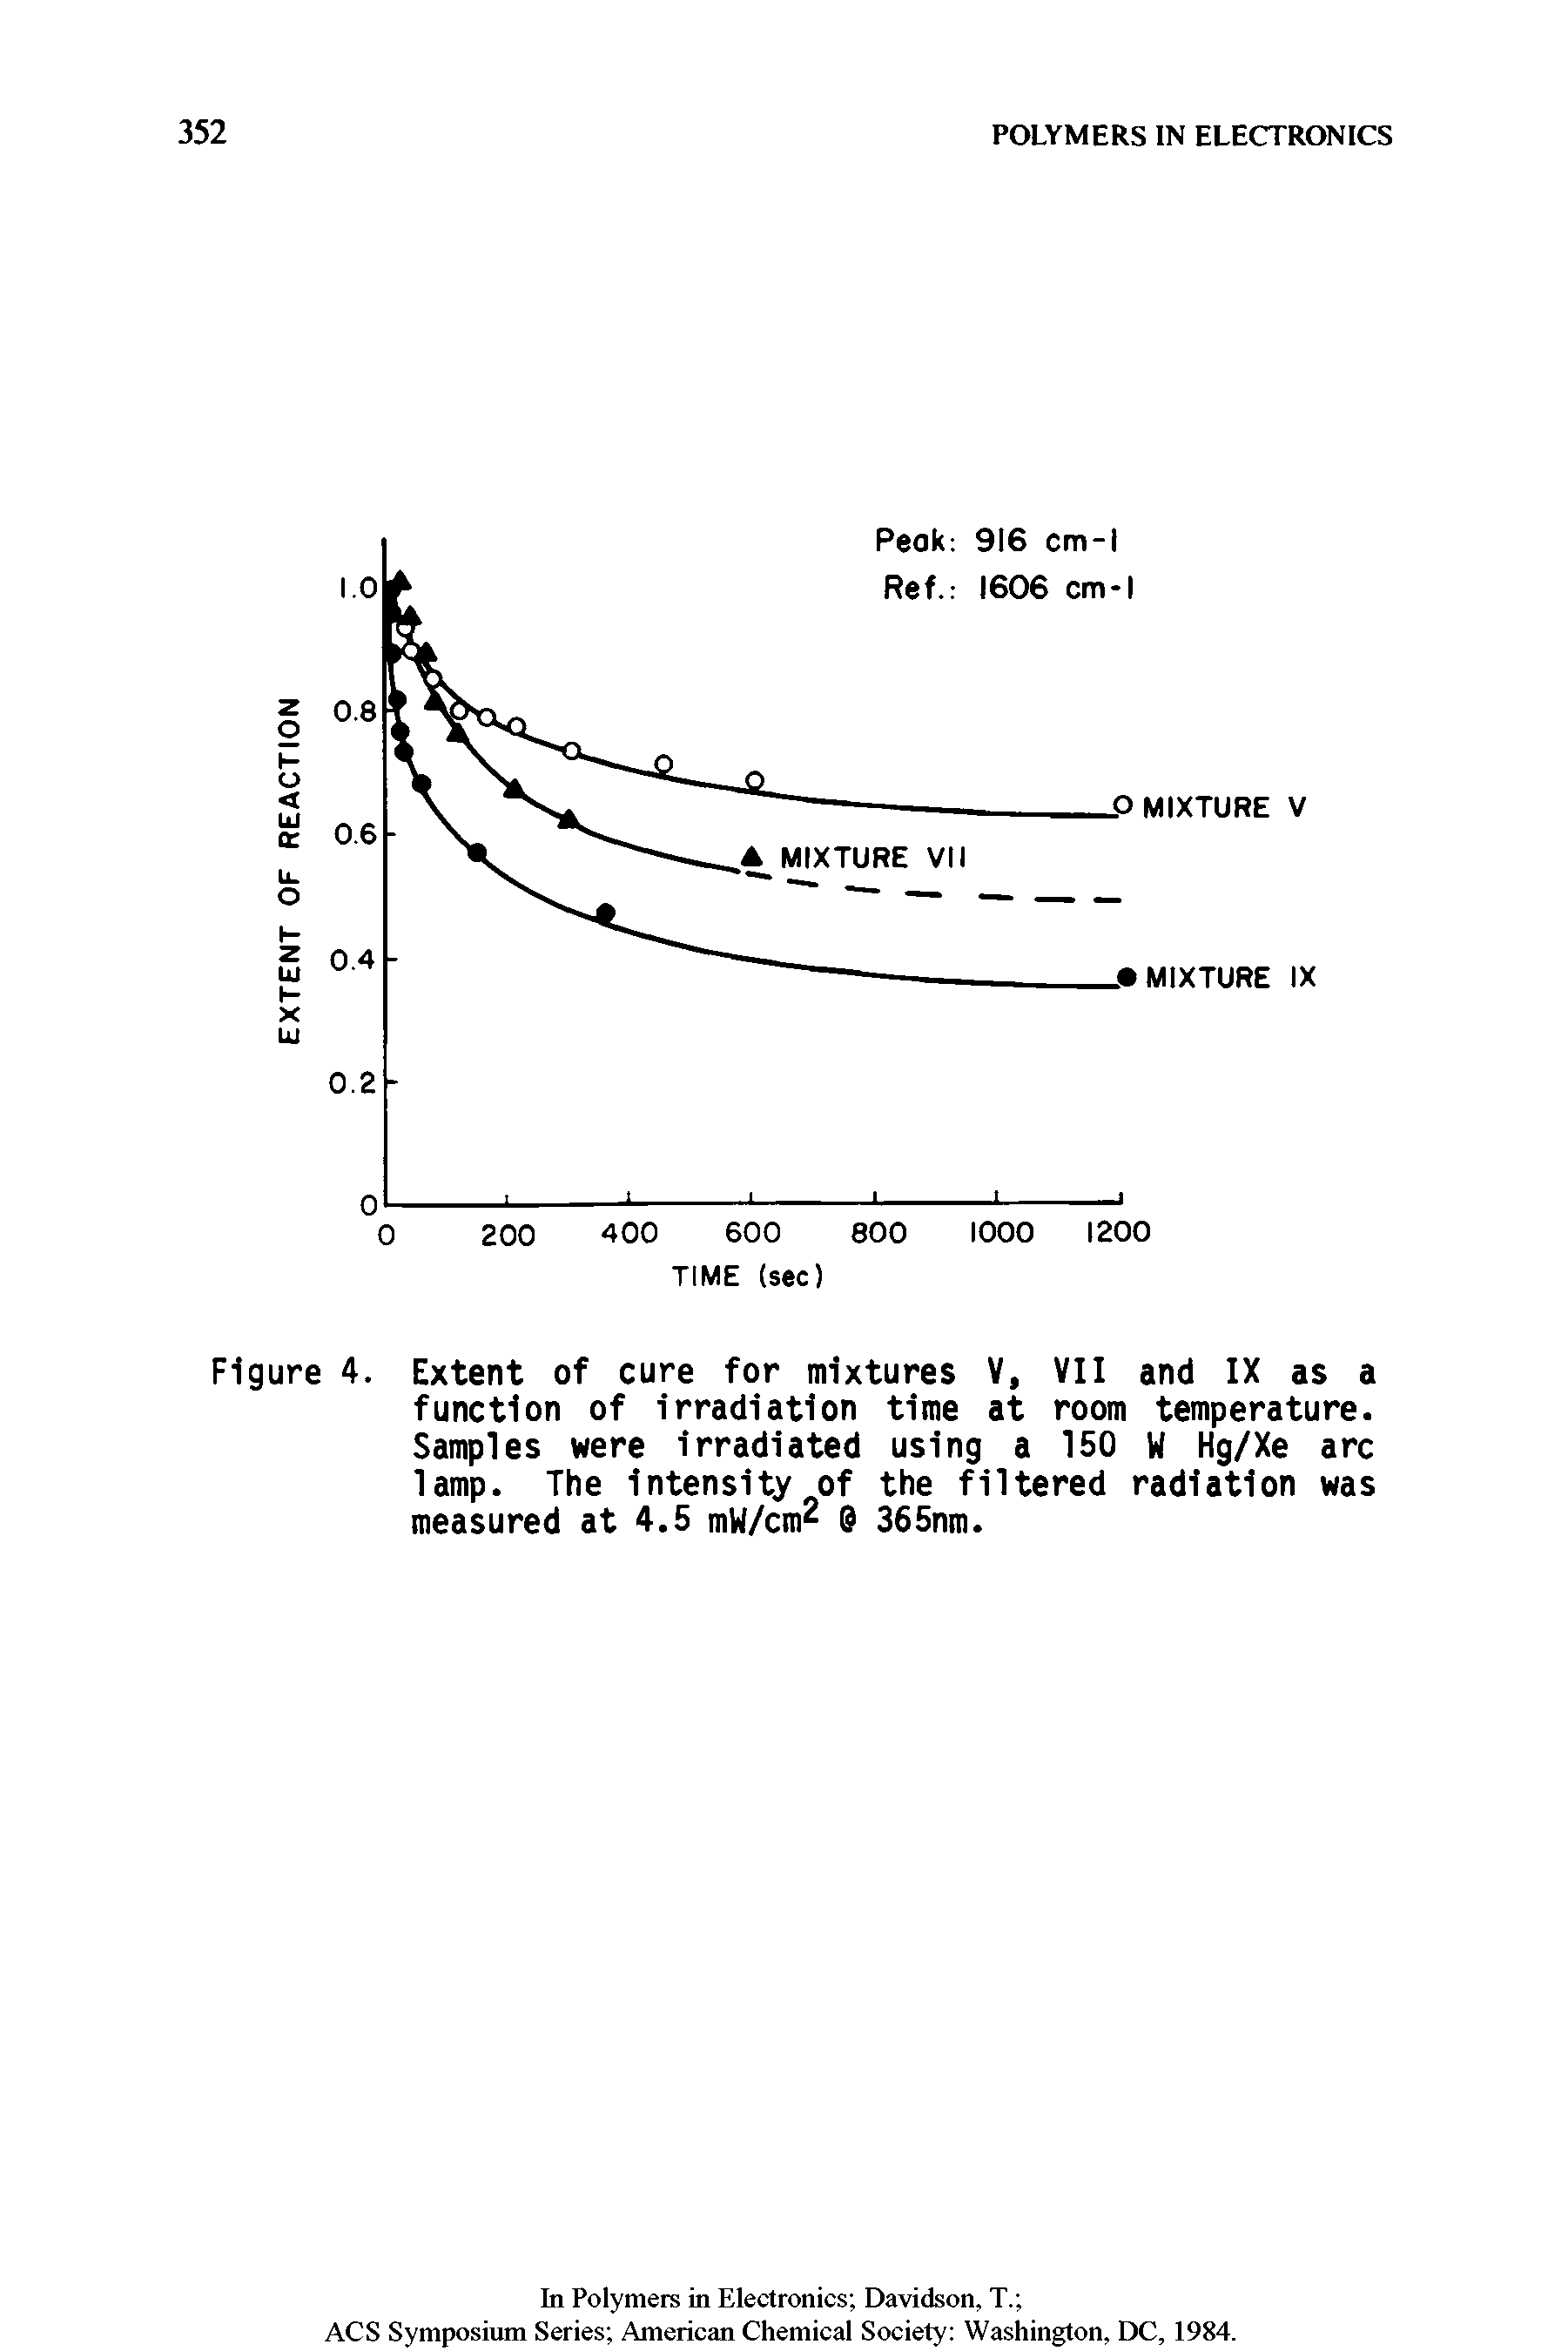 Figure 4. Extent of cure for mixtures V, VII and IX as a function of irradiation time at room temperature. Samples were irradiated using a 150 W Hg/Xe arc lamp. The intensity of the filtered radiation was measured at 4.5 mW/cm 6 365nm.